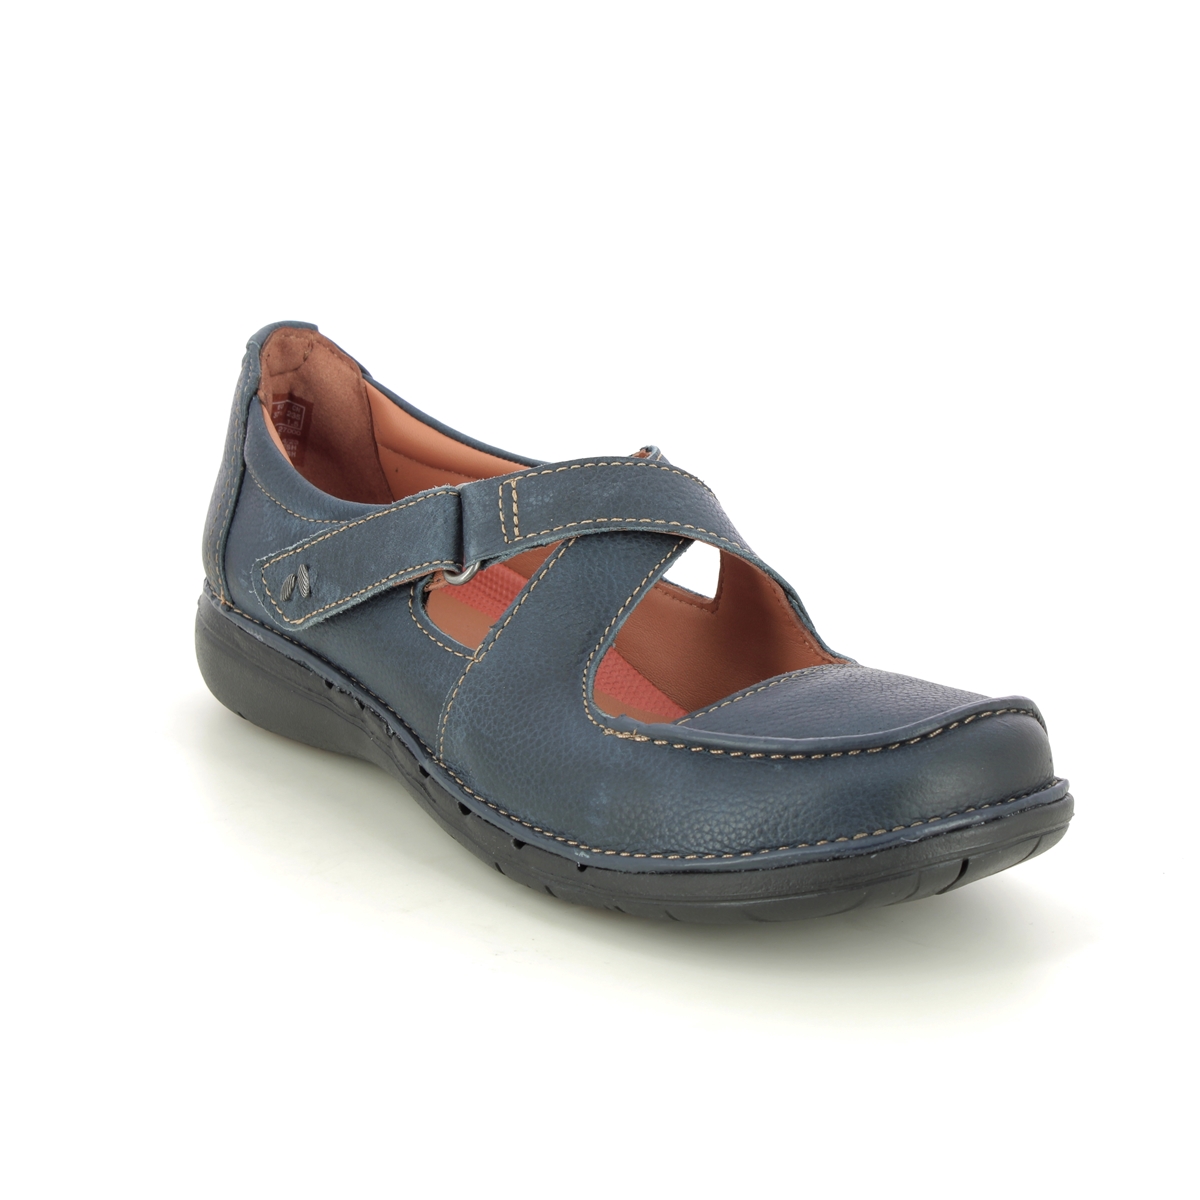 Clarks Un Loop Strap Navy Leather Womens Mary Jane Shoes 749724D In Size 7 In Plain Navy Leather